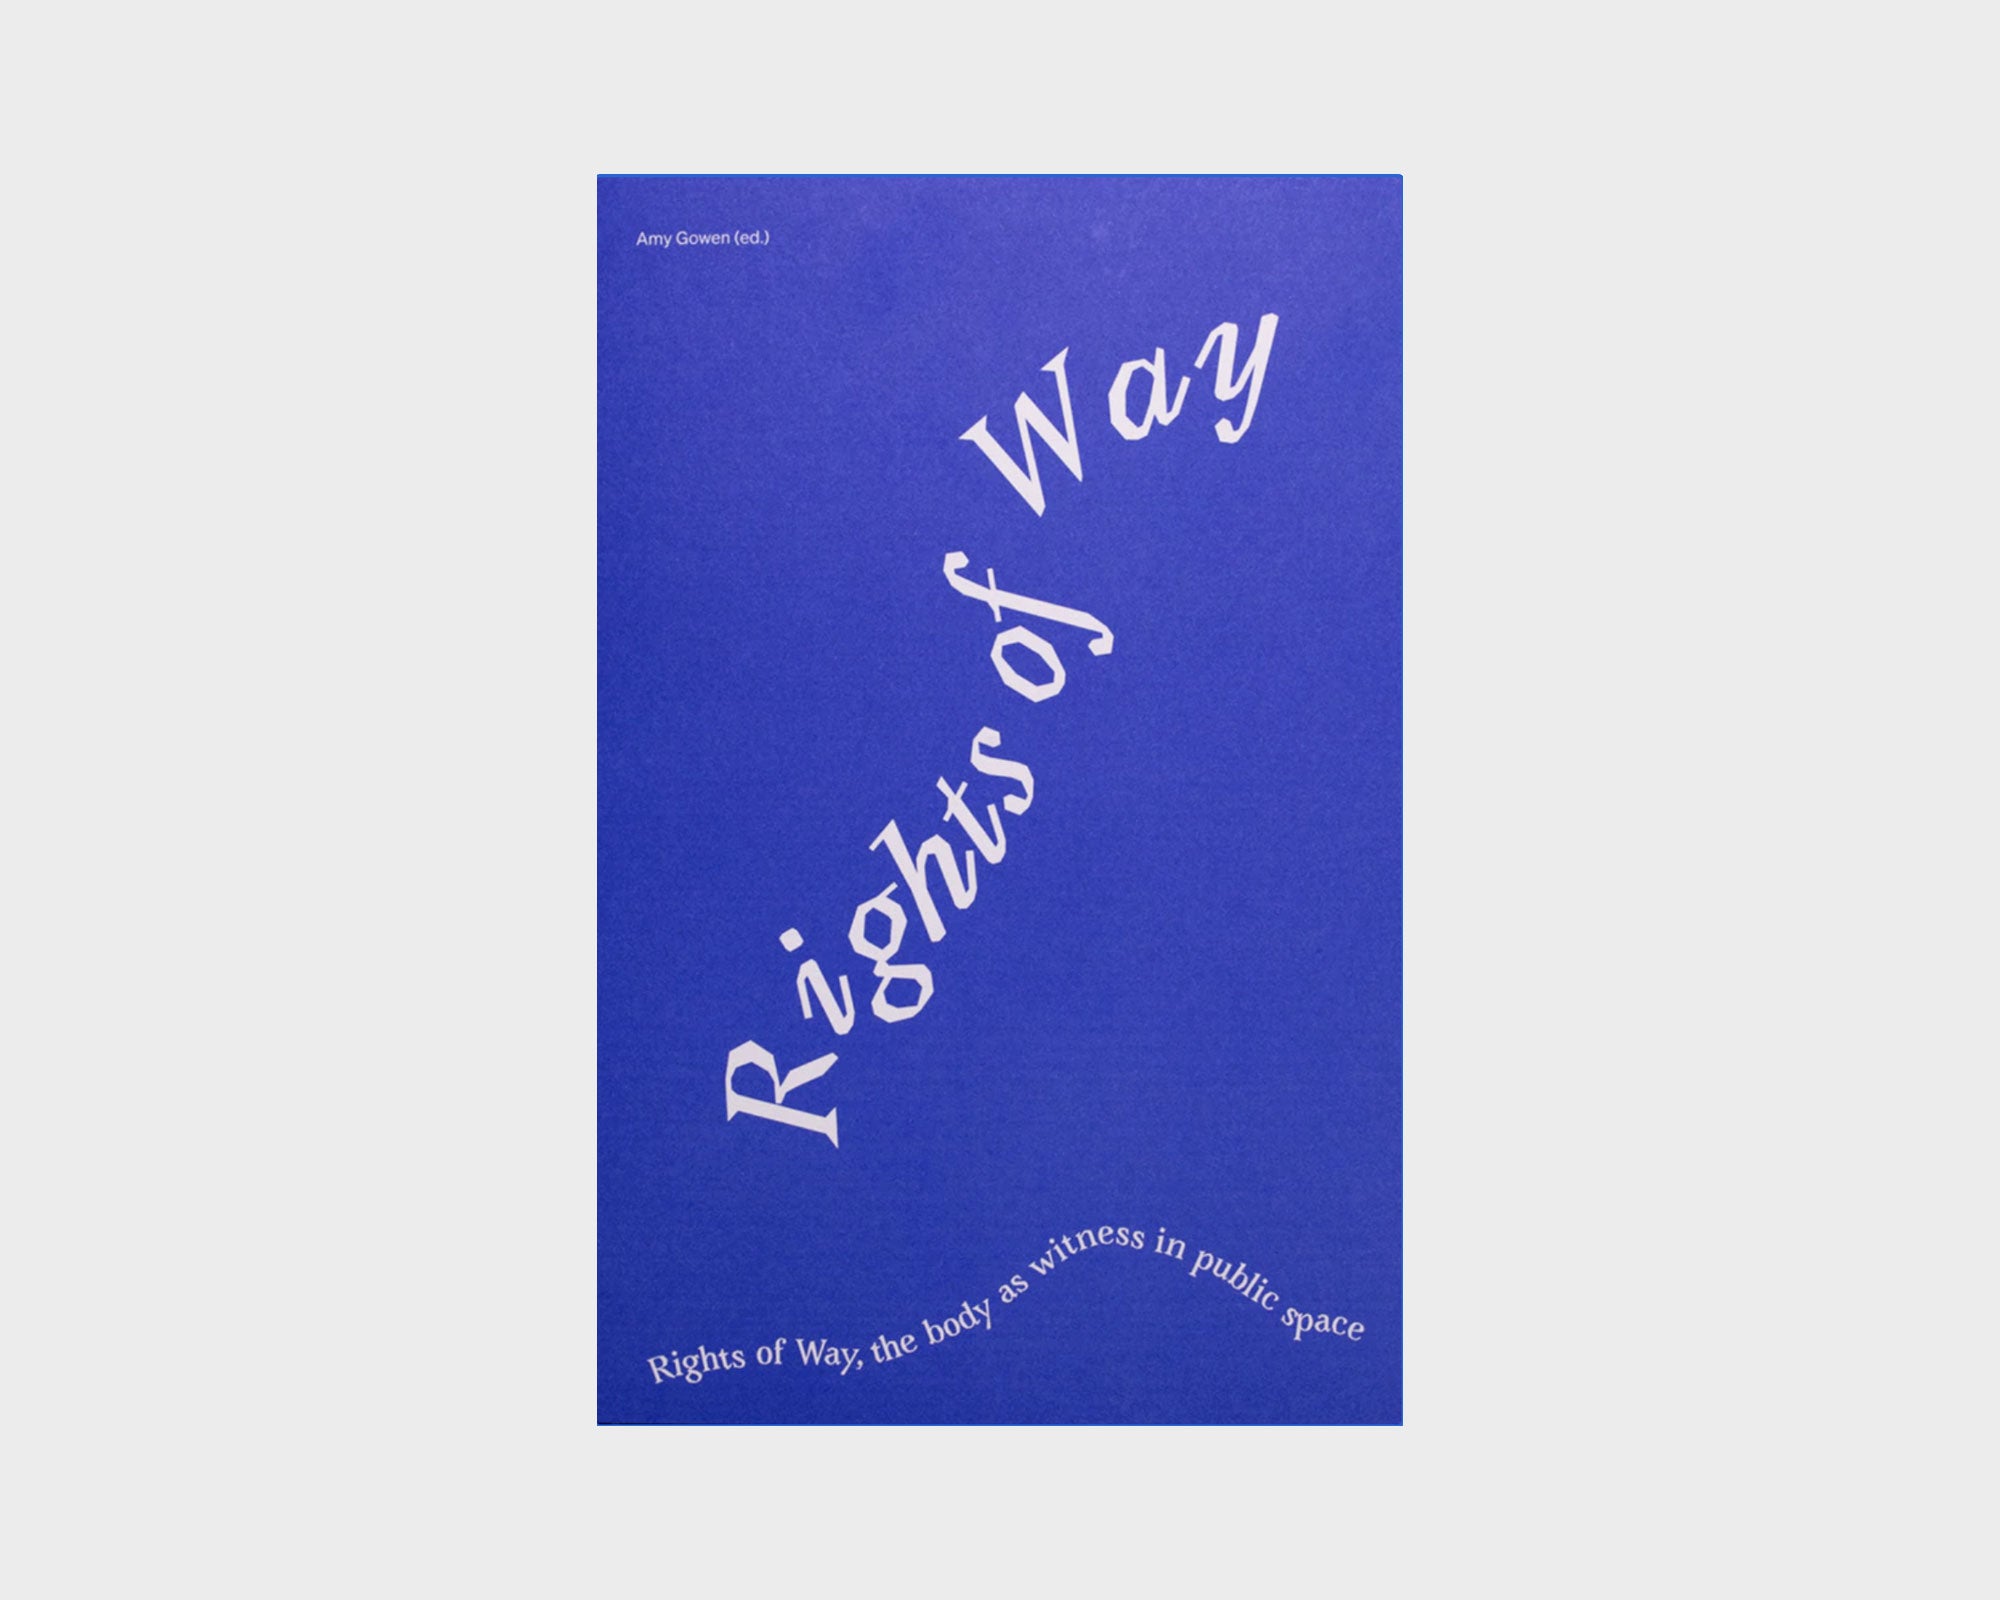 Rights of Way: The Body as Witness In Public Space